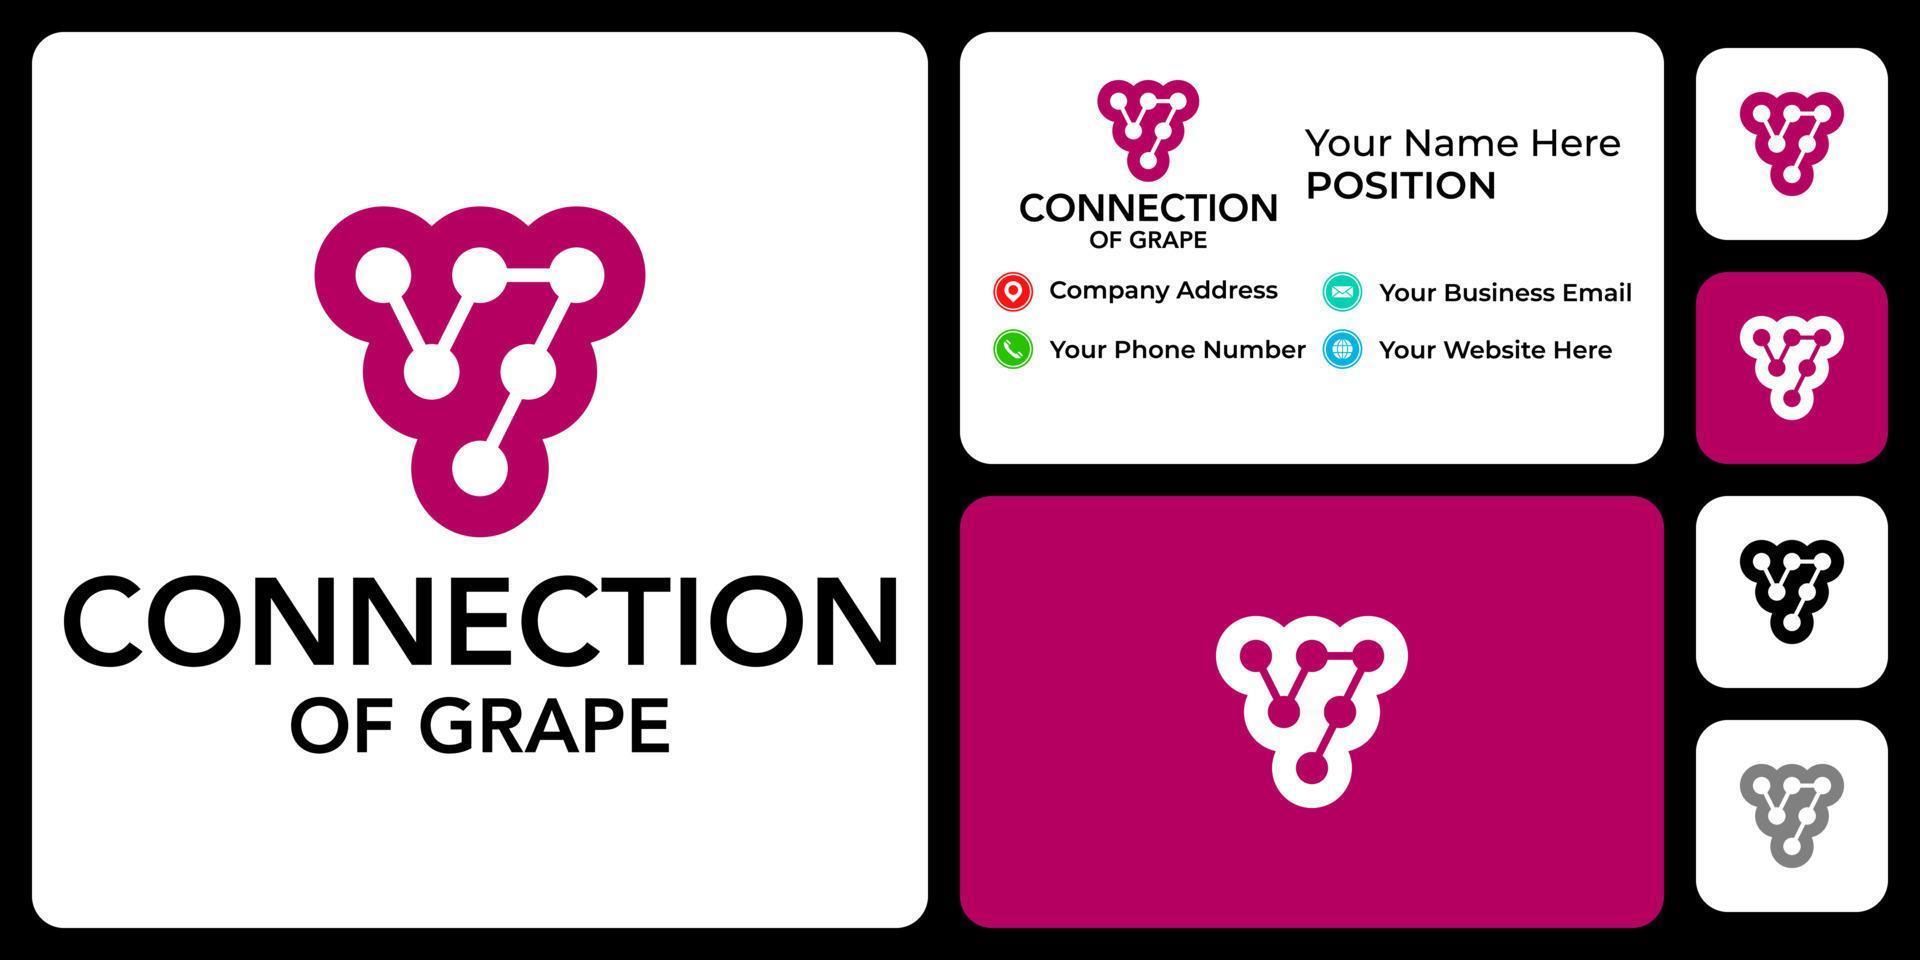 Grape connection logo design with business card template. vector